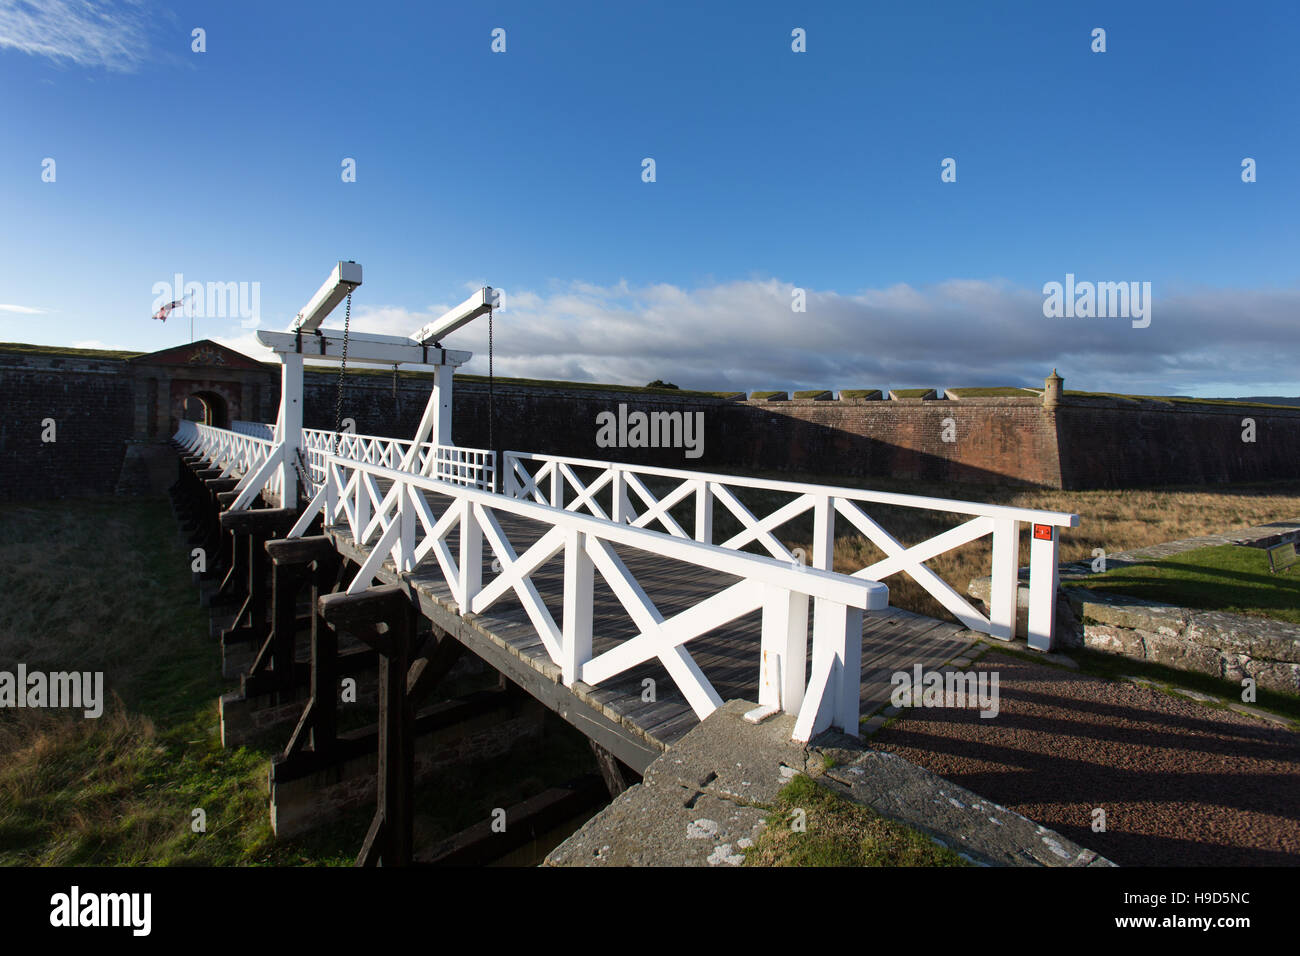 Fort George Scotland. The raised walkway and drawbridge entrance, to the main fortifications of Fort George. Stock Photo